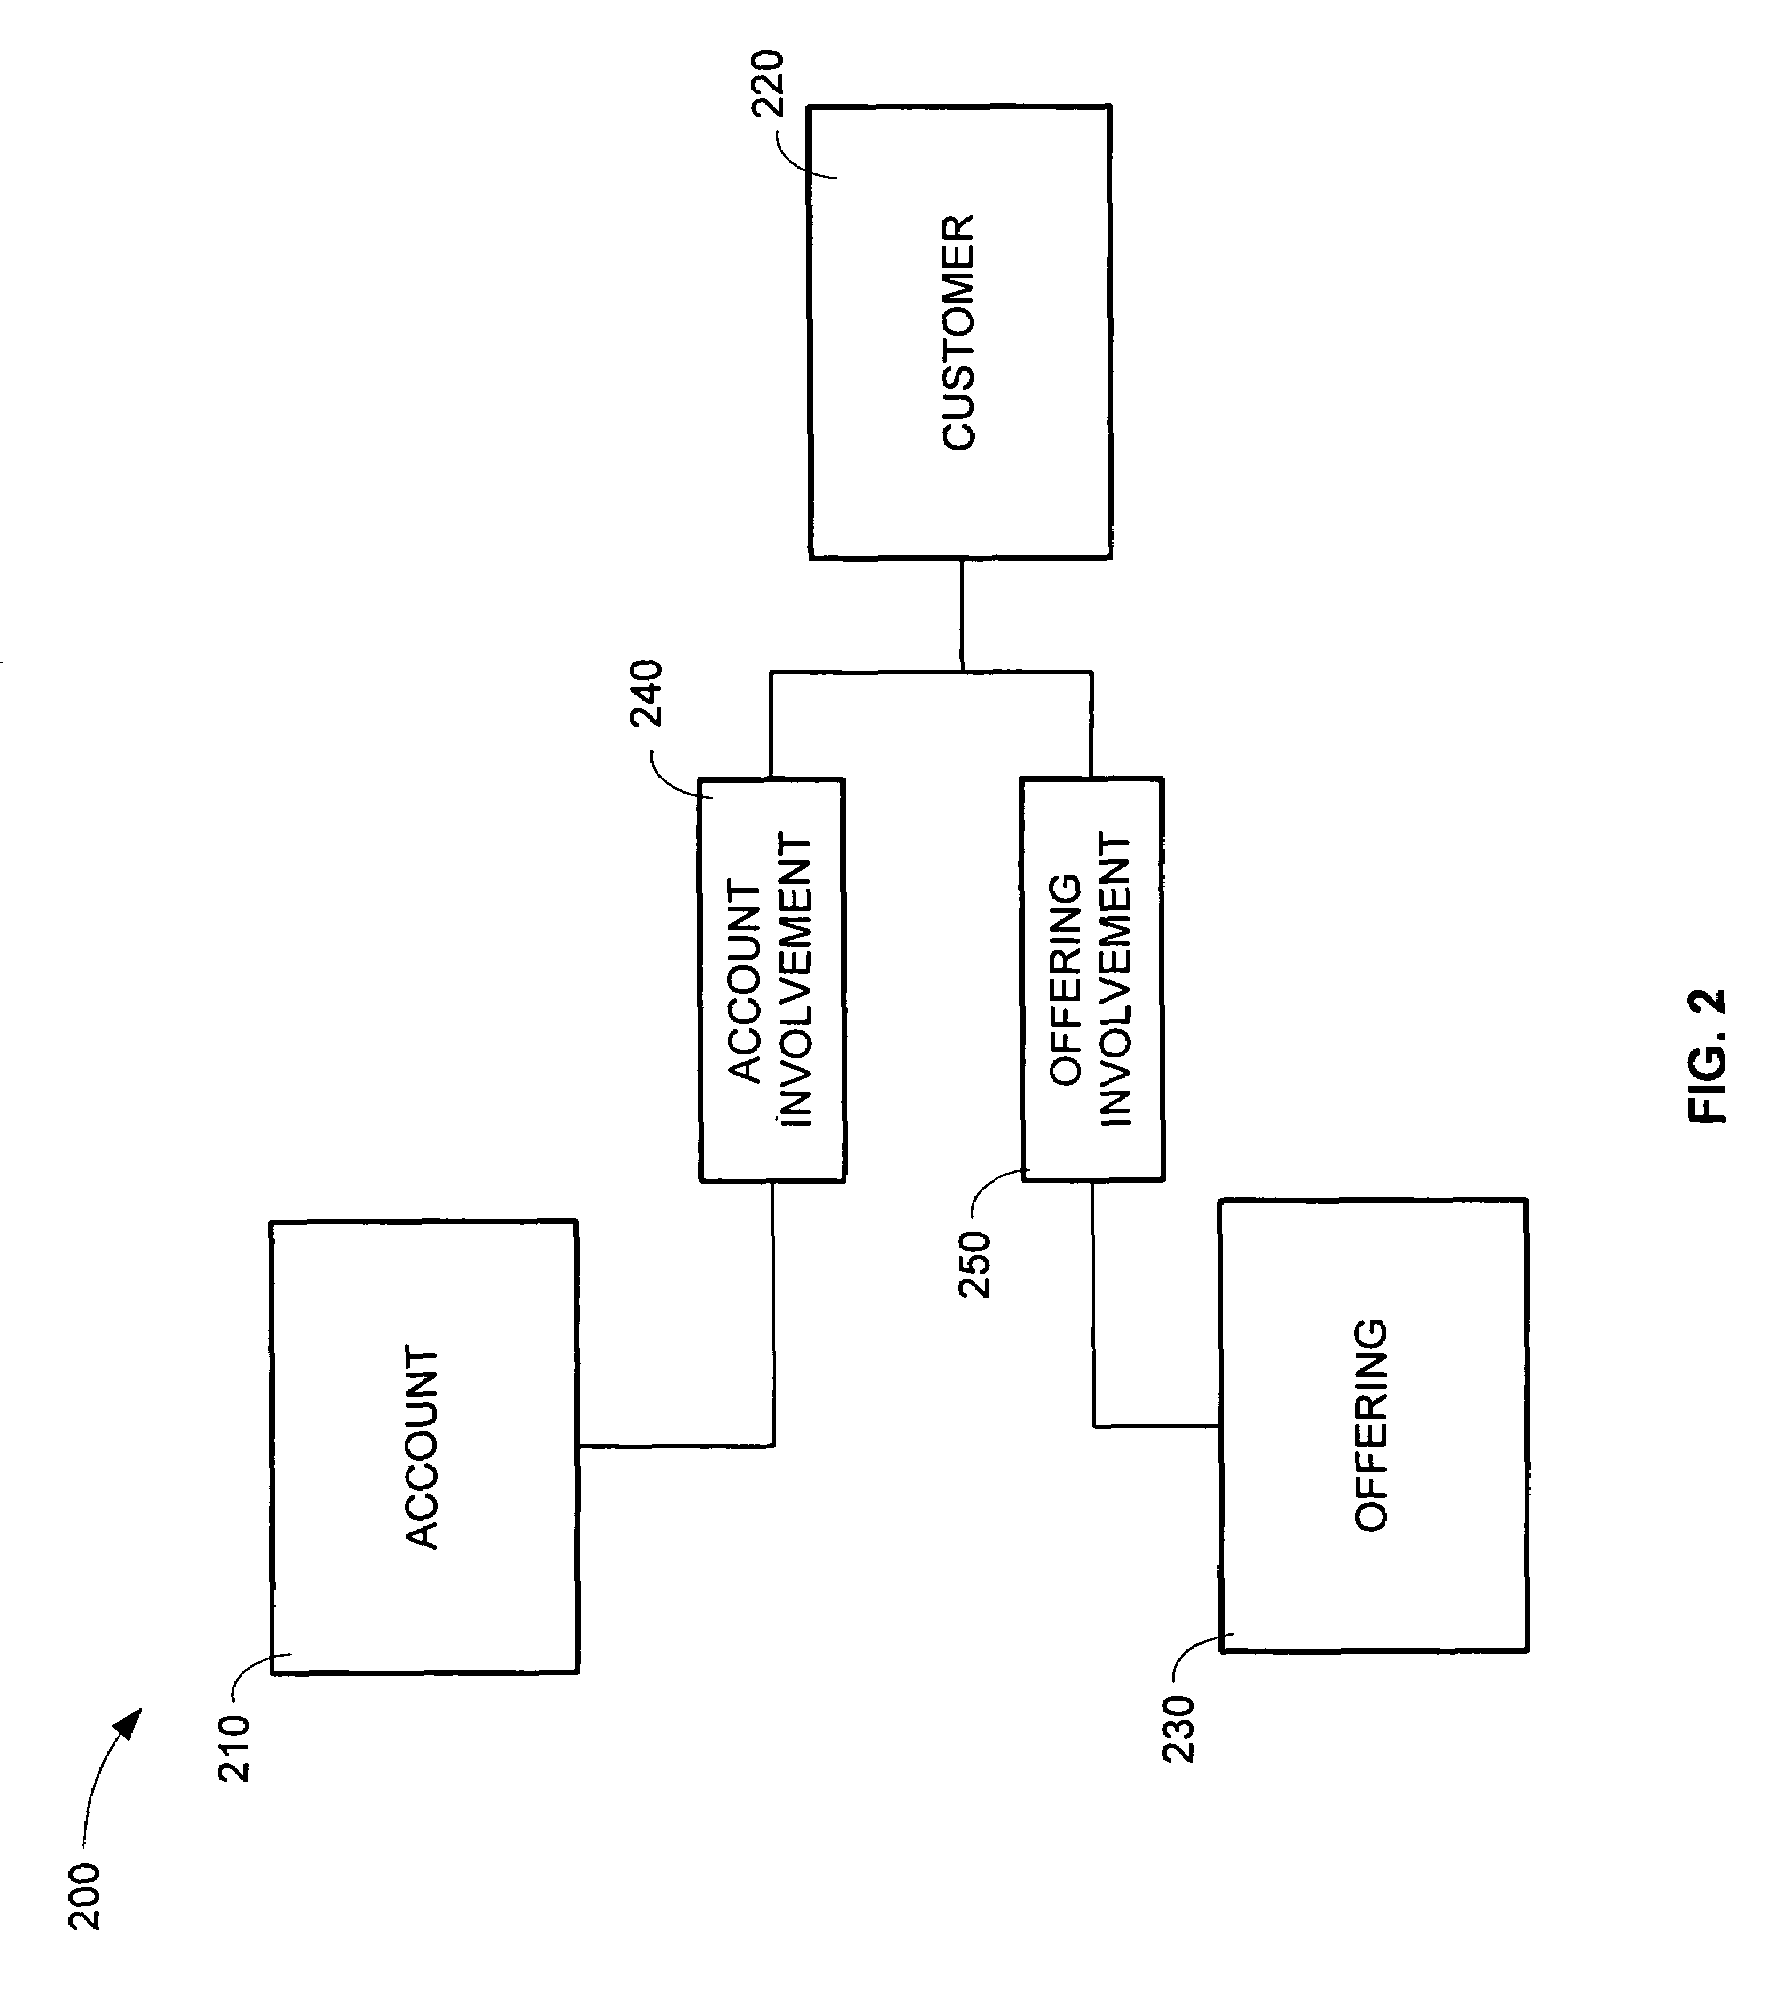 Account level participation for underwriting components